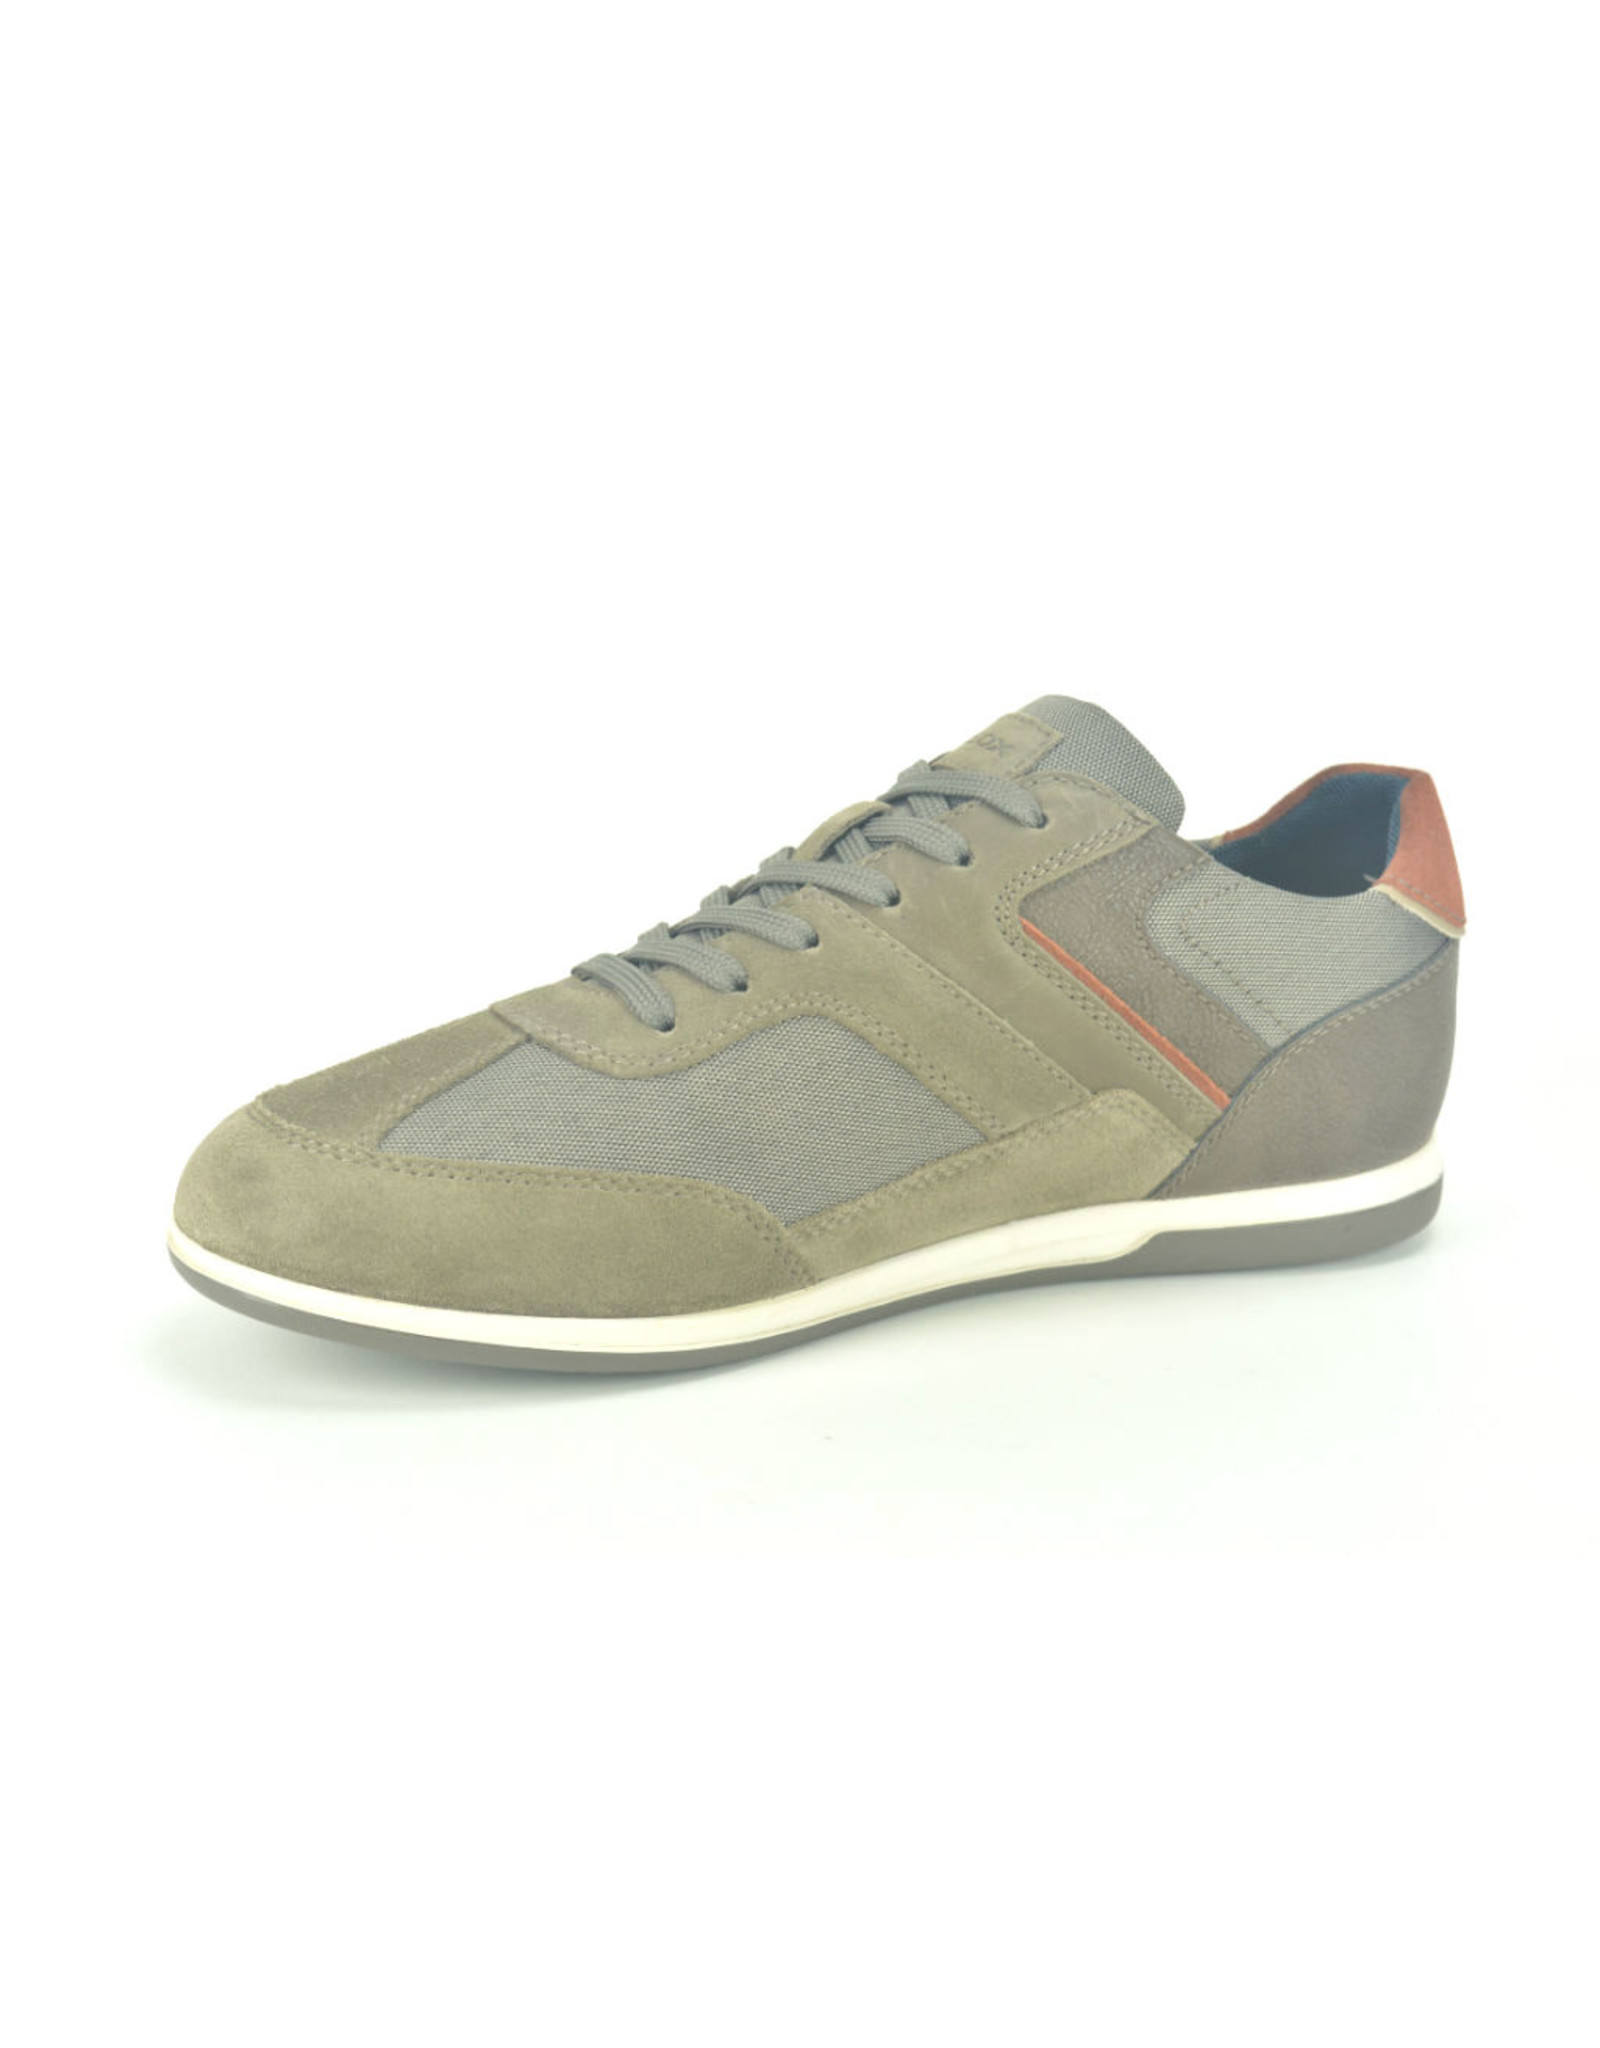 Geox 11689 taupe